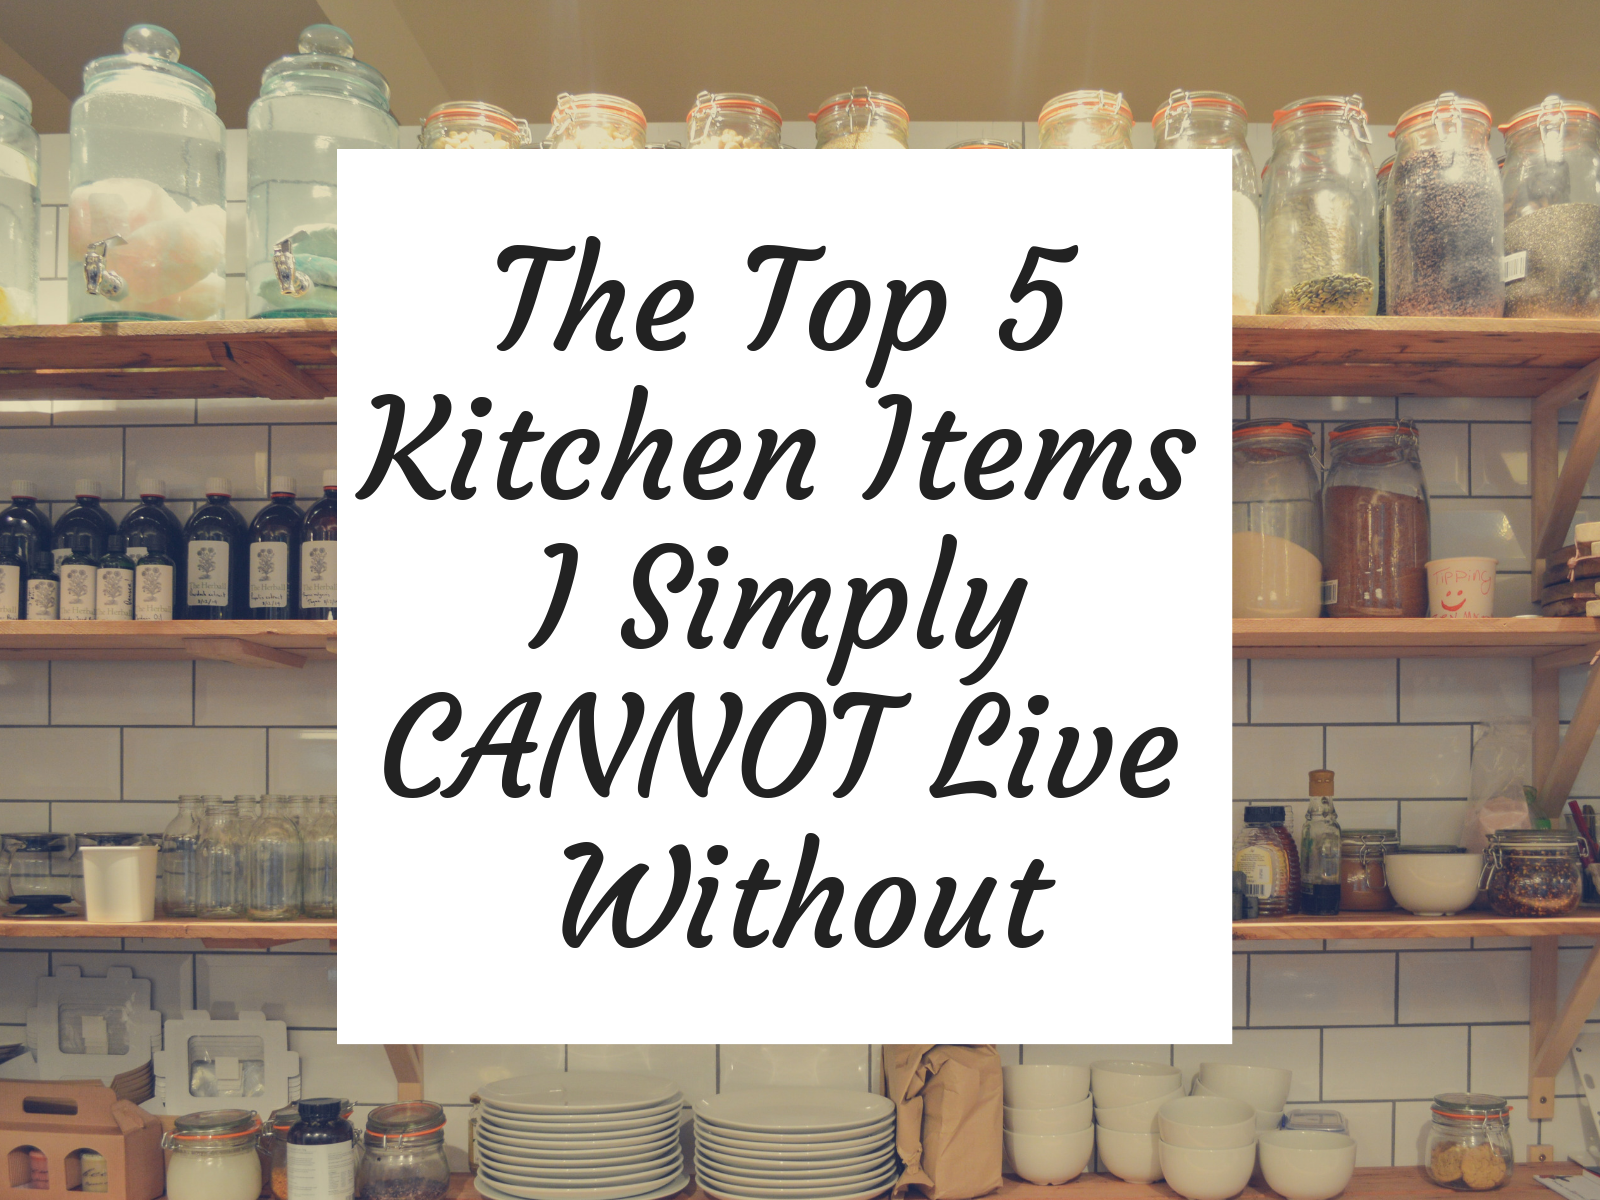 We all got those items we can't live without and I definitely have a nice, long list of those things I don't feel complete without. My journals and home books, the internet, stuffed animals from mine and Phil's childhoods, and strong coffee all make the list. But since I love being in the kitchen constantly, I figured I would share the items in my kitchen that I simply cannot live without.